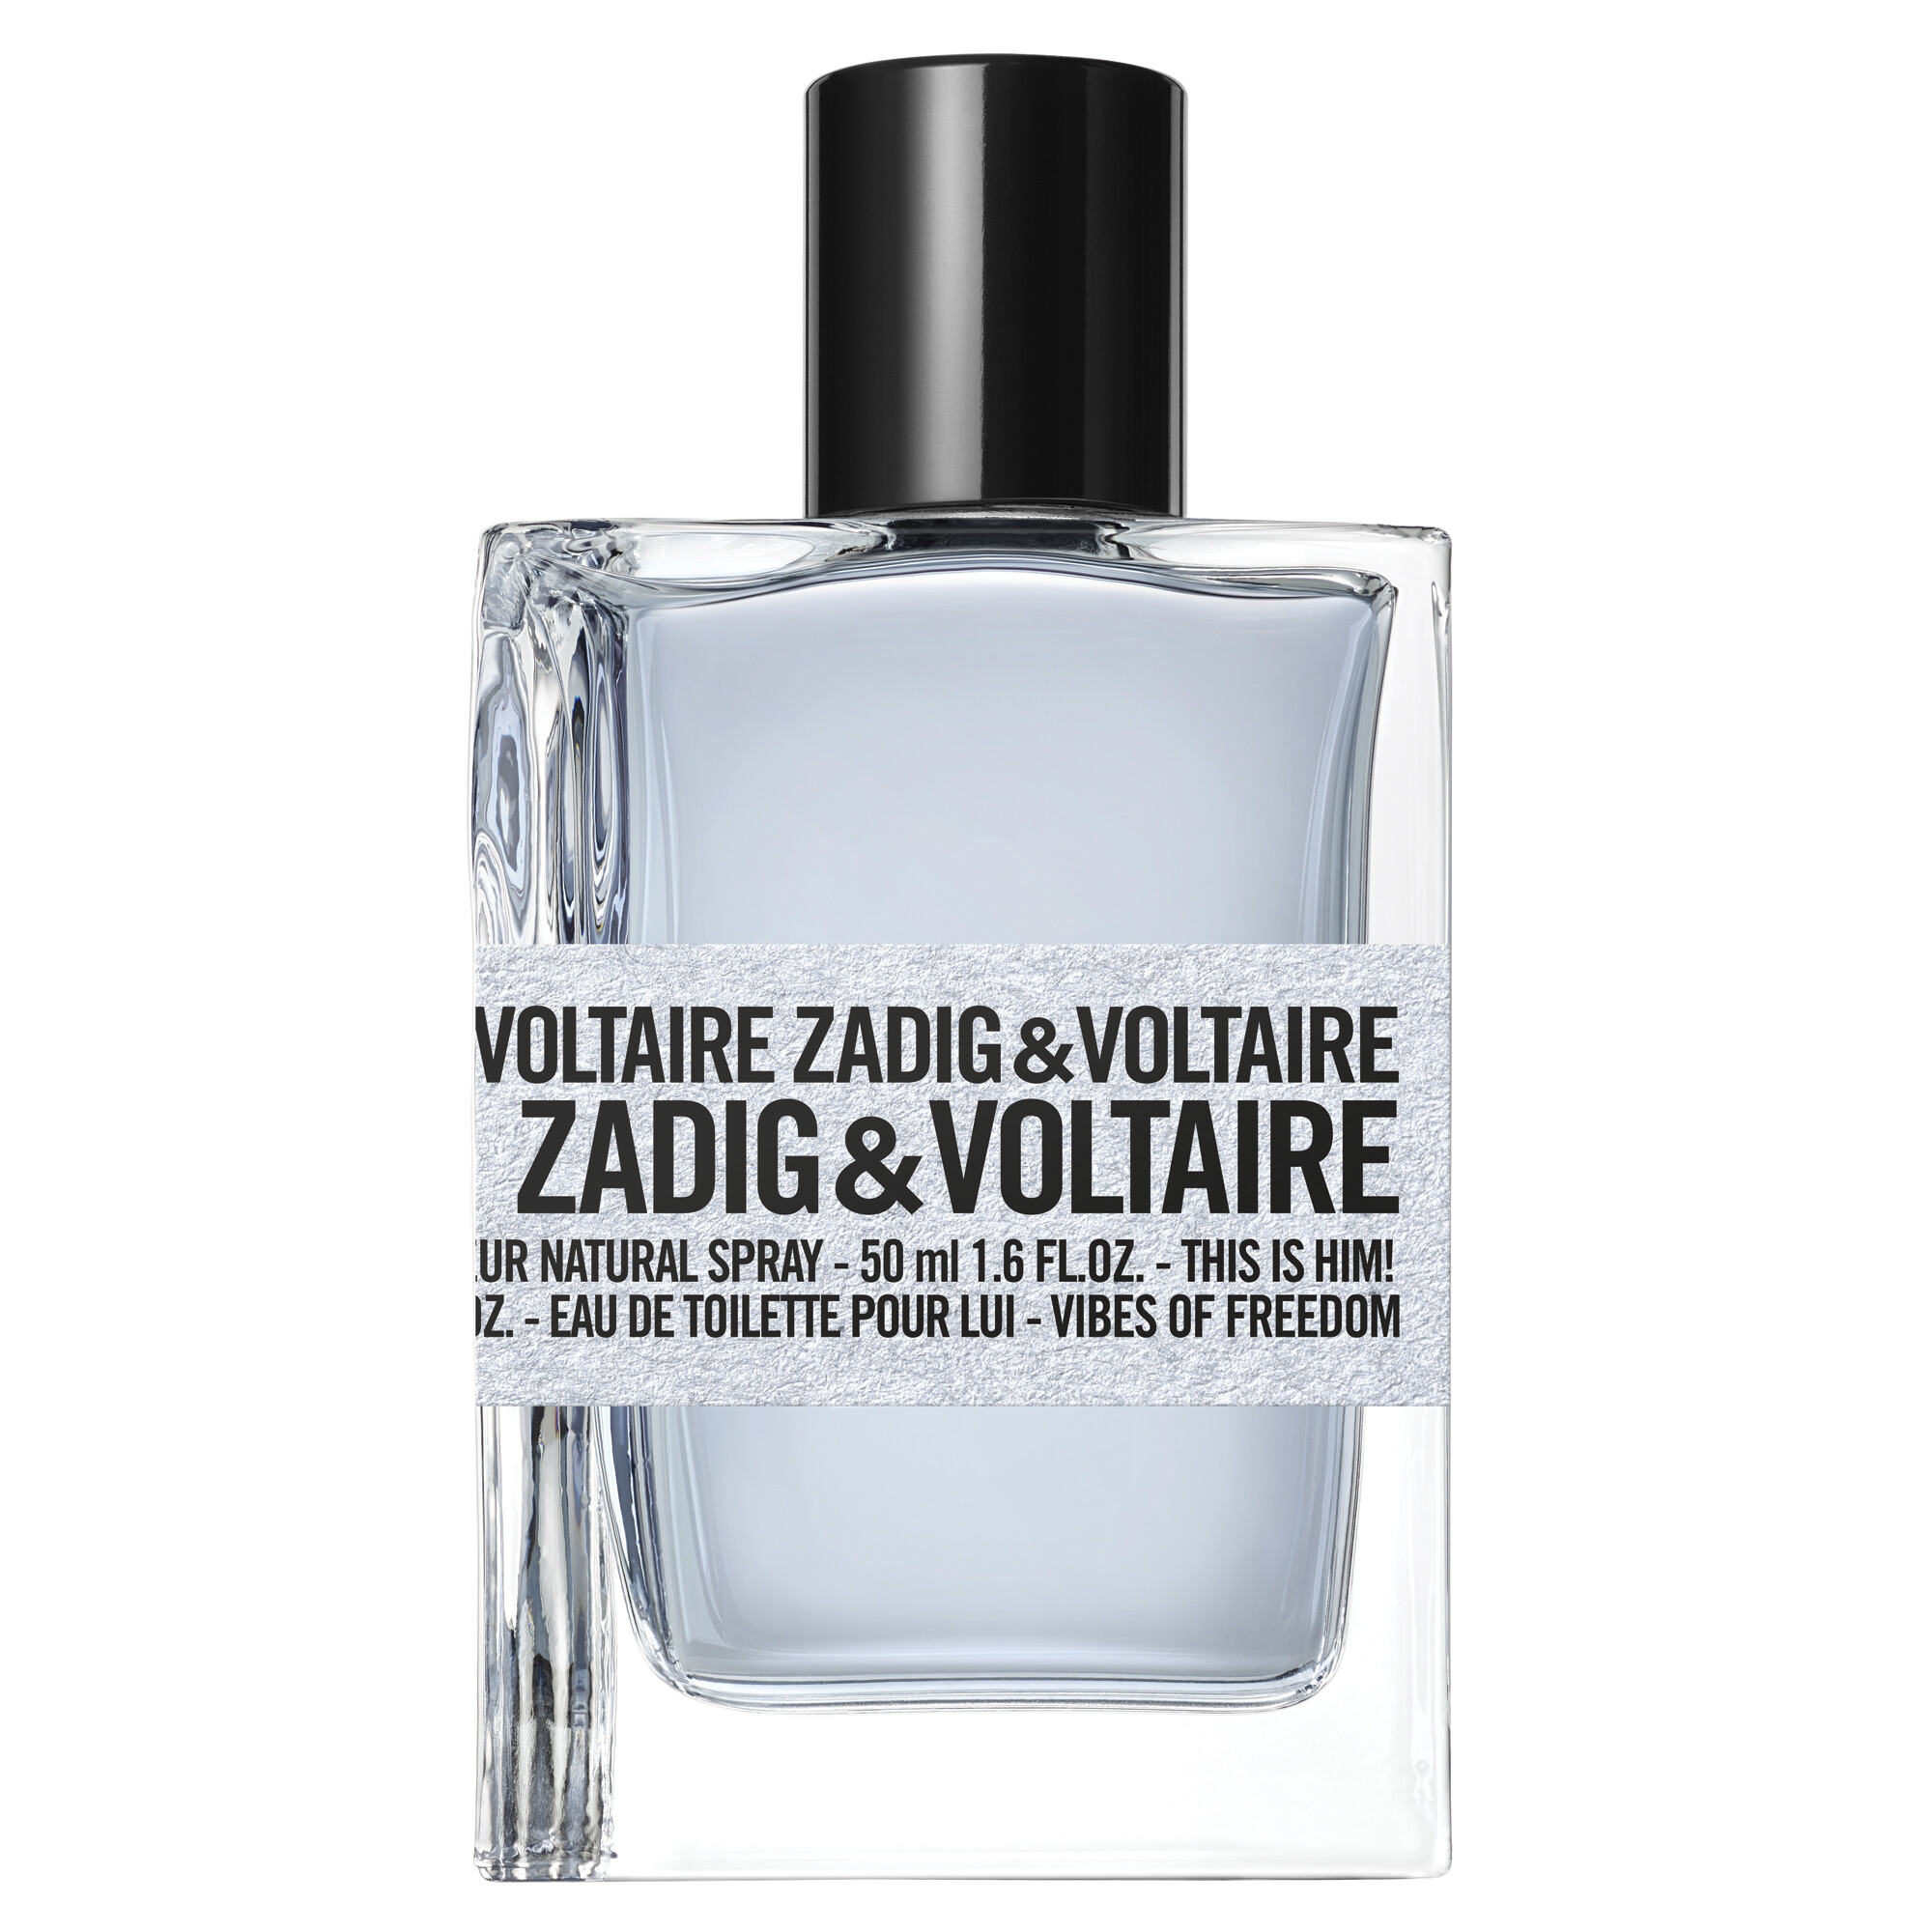 Zadig & Voltaire This Is Him! Vibes of Freedom EDT 50m